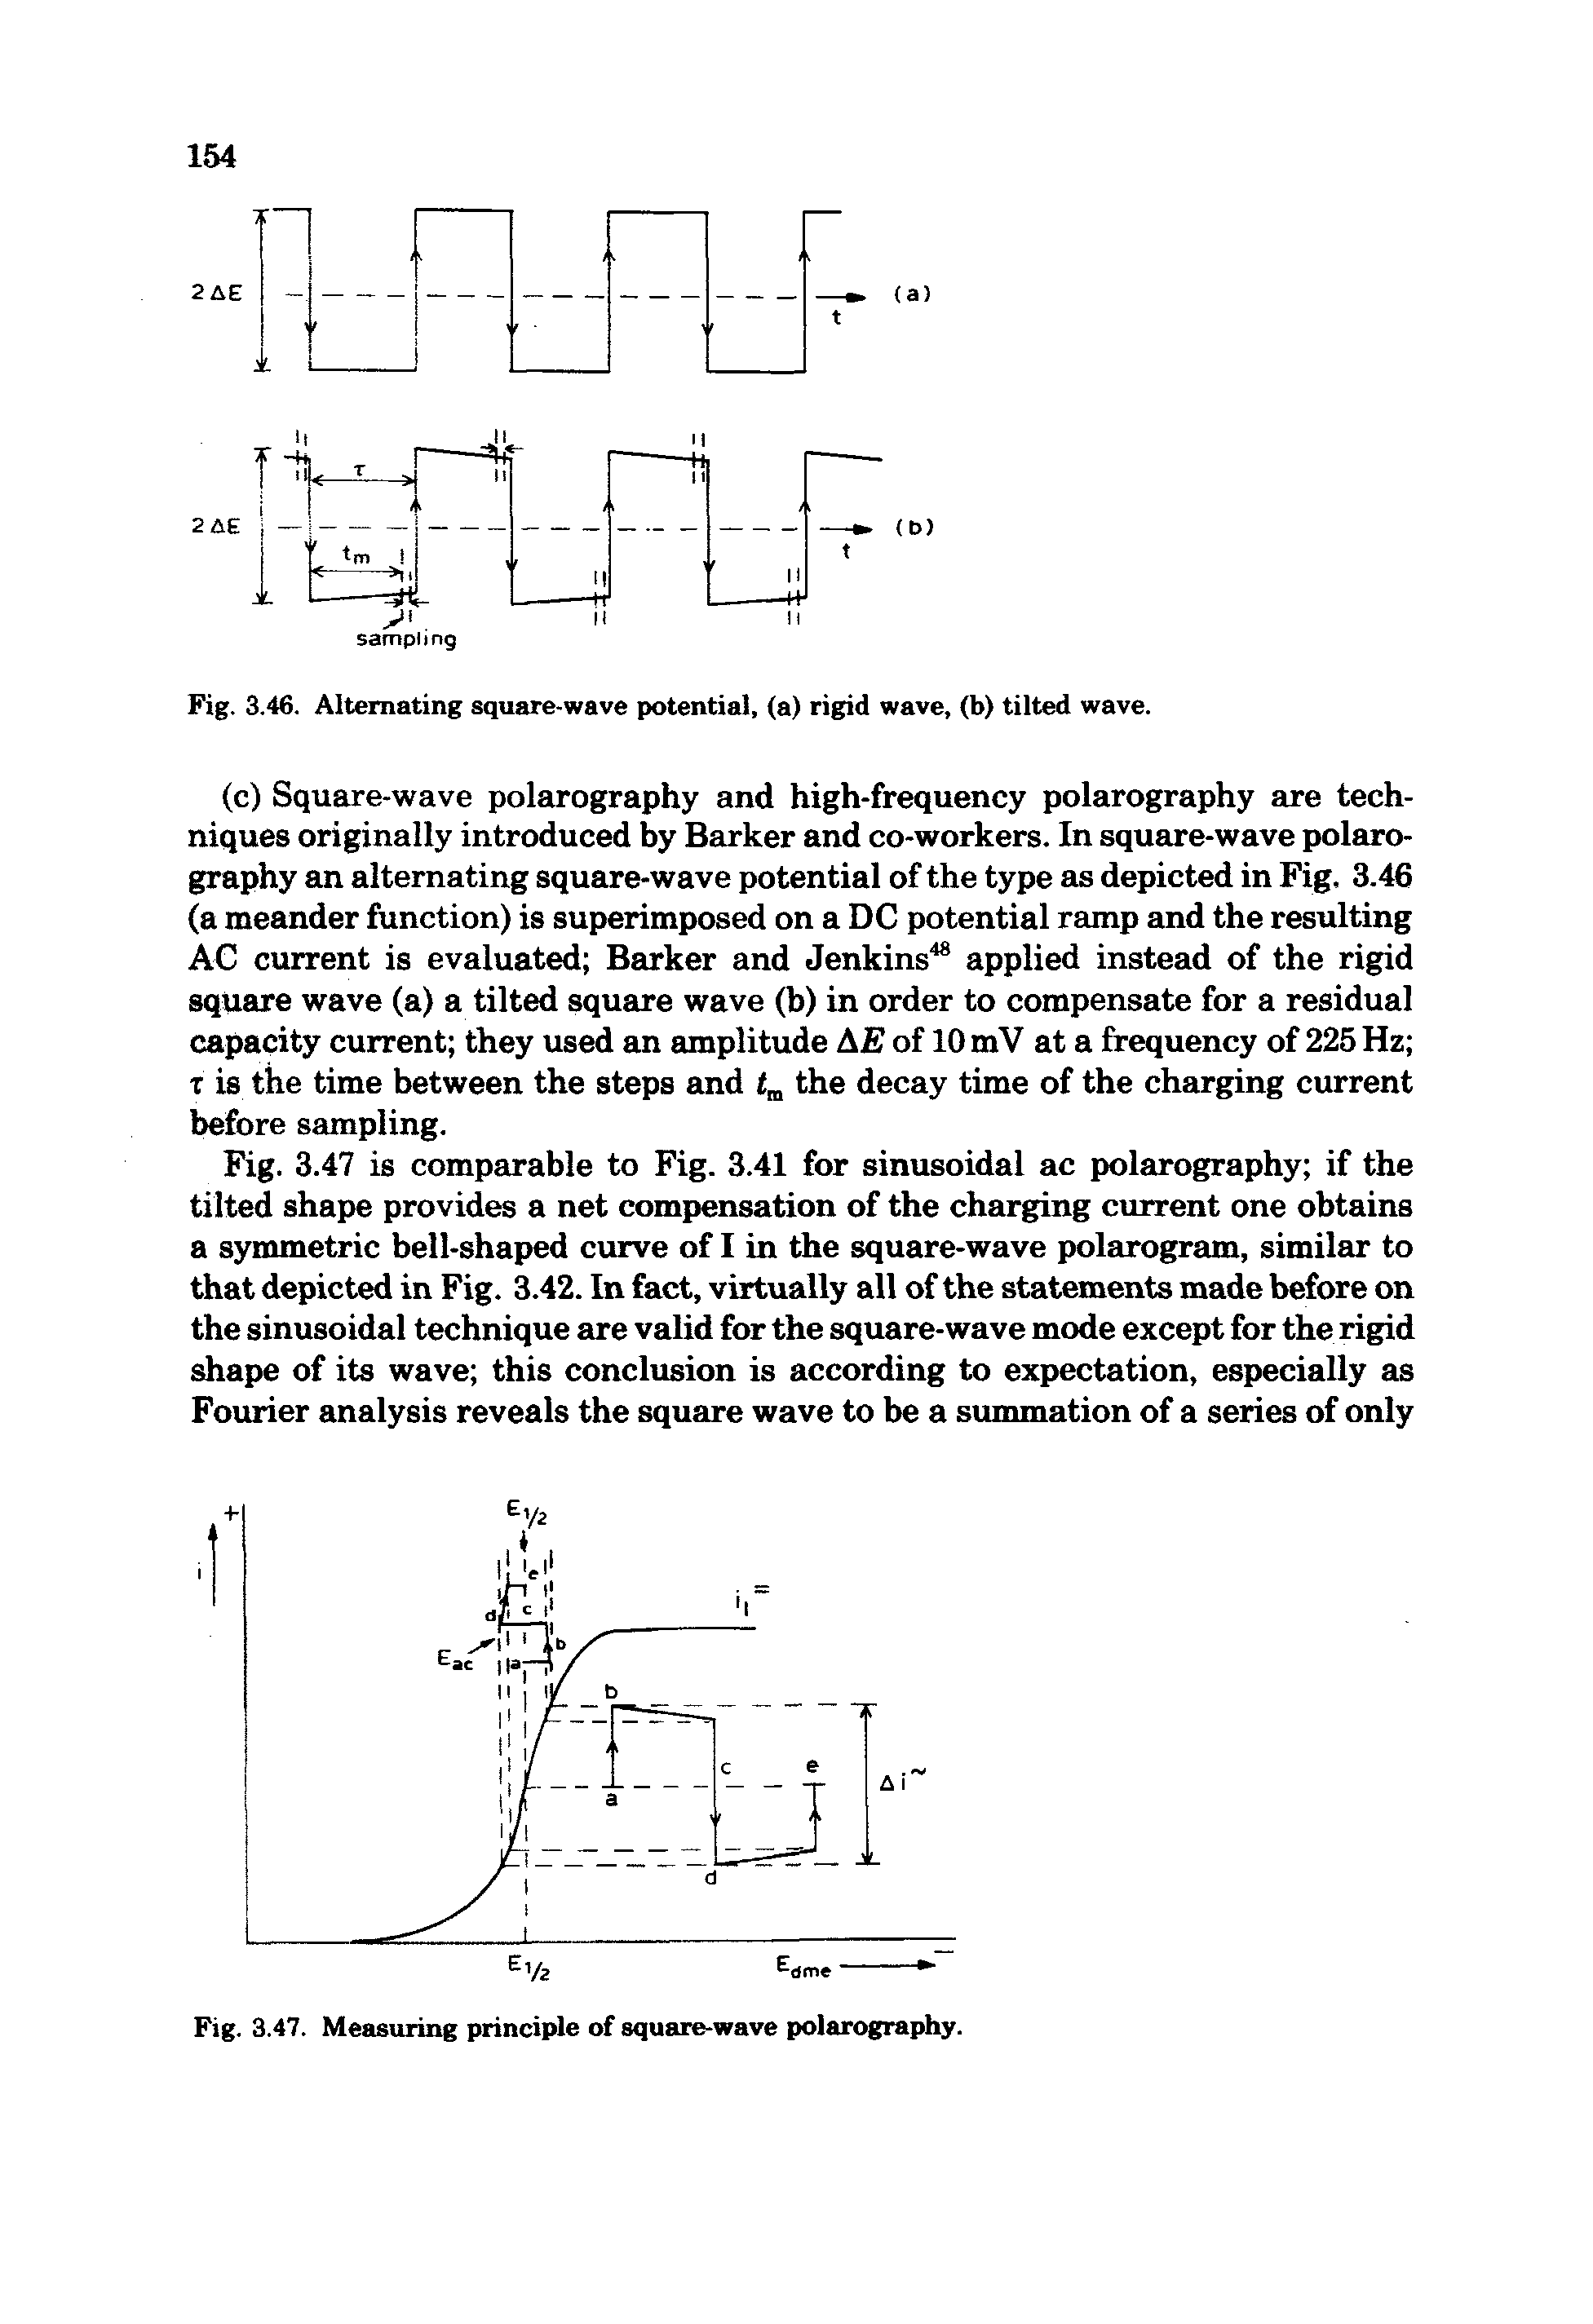 Fig. 3.47 is comparable to Fig. 3.41 for sinusoidal ac polarography if the tilted shape provides a net compensation of the charging current one obtains a symmetric bell-shaped curve of I in the square-wave polarogram, similar to that depicted in Fig. 3.42. In fact, virtually all of the statements made before on the sinusoidal technique are valid for the square-wave mode except for the rigid shape of its wave this conclusion is according to expectation, especially as Fourier analysis reveals the square wave to be a summation of a series of only...